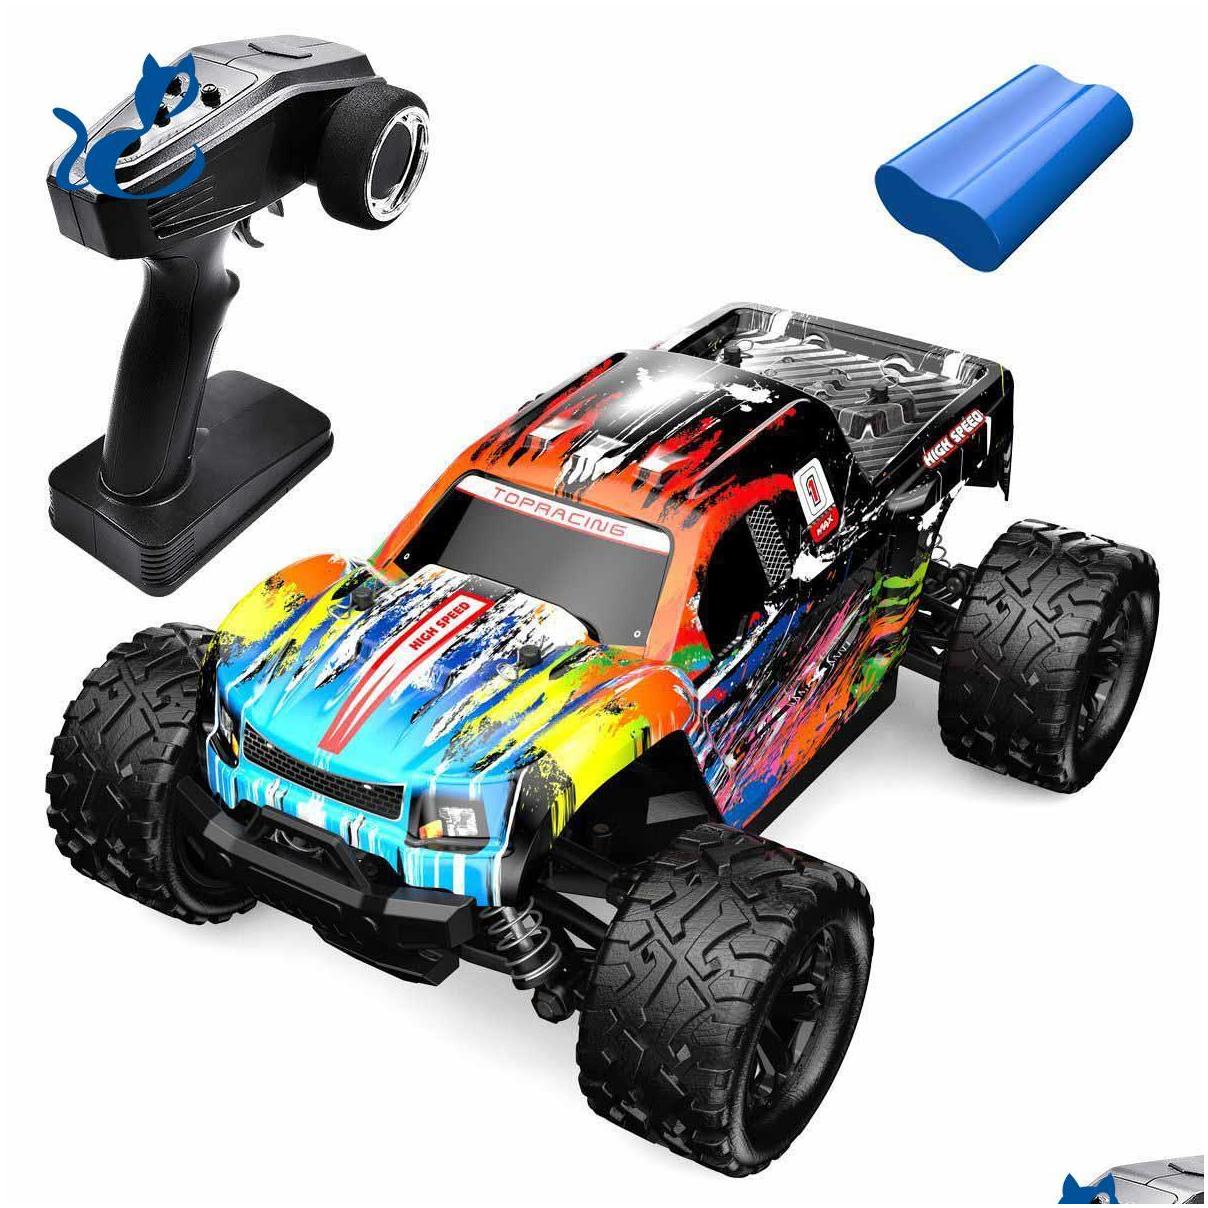 emt o3 remote control car truck fast rc cars for adults cool drifting truck trucks 4x4 offroad waterproof differential mechanism kid christmas boy gifts